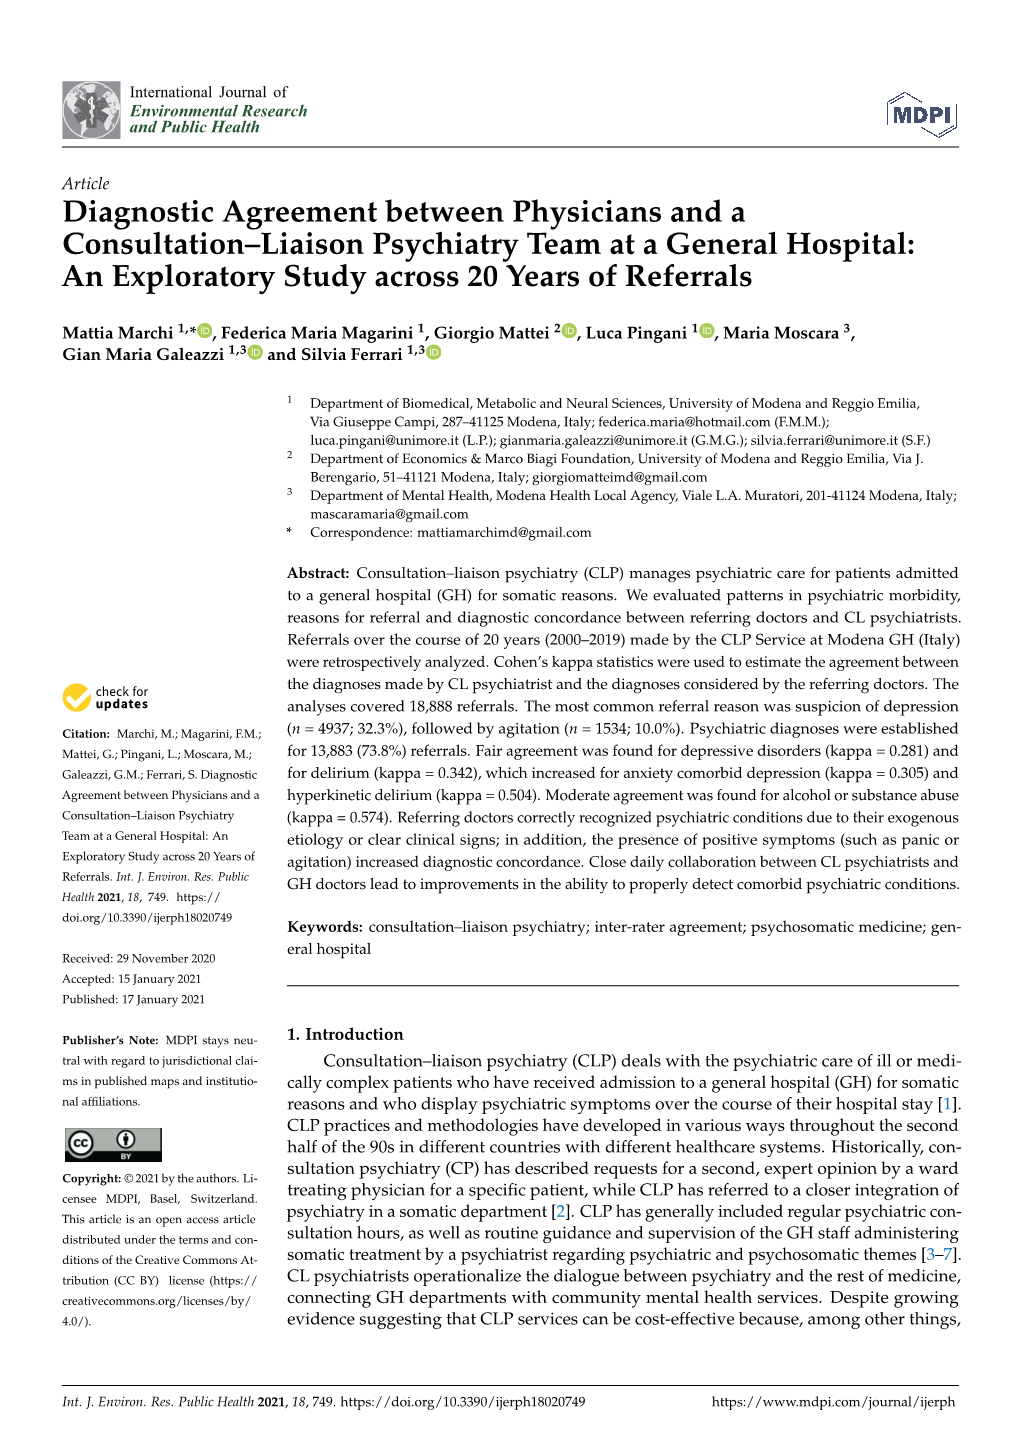 Diagnostic Agreement Between Physicians and a Consultation–Liaison Psychiatry Team at a General Hospital: an Exploratory Study Across 20 Years of Referrals